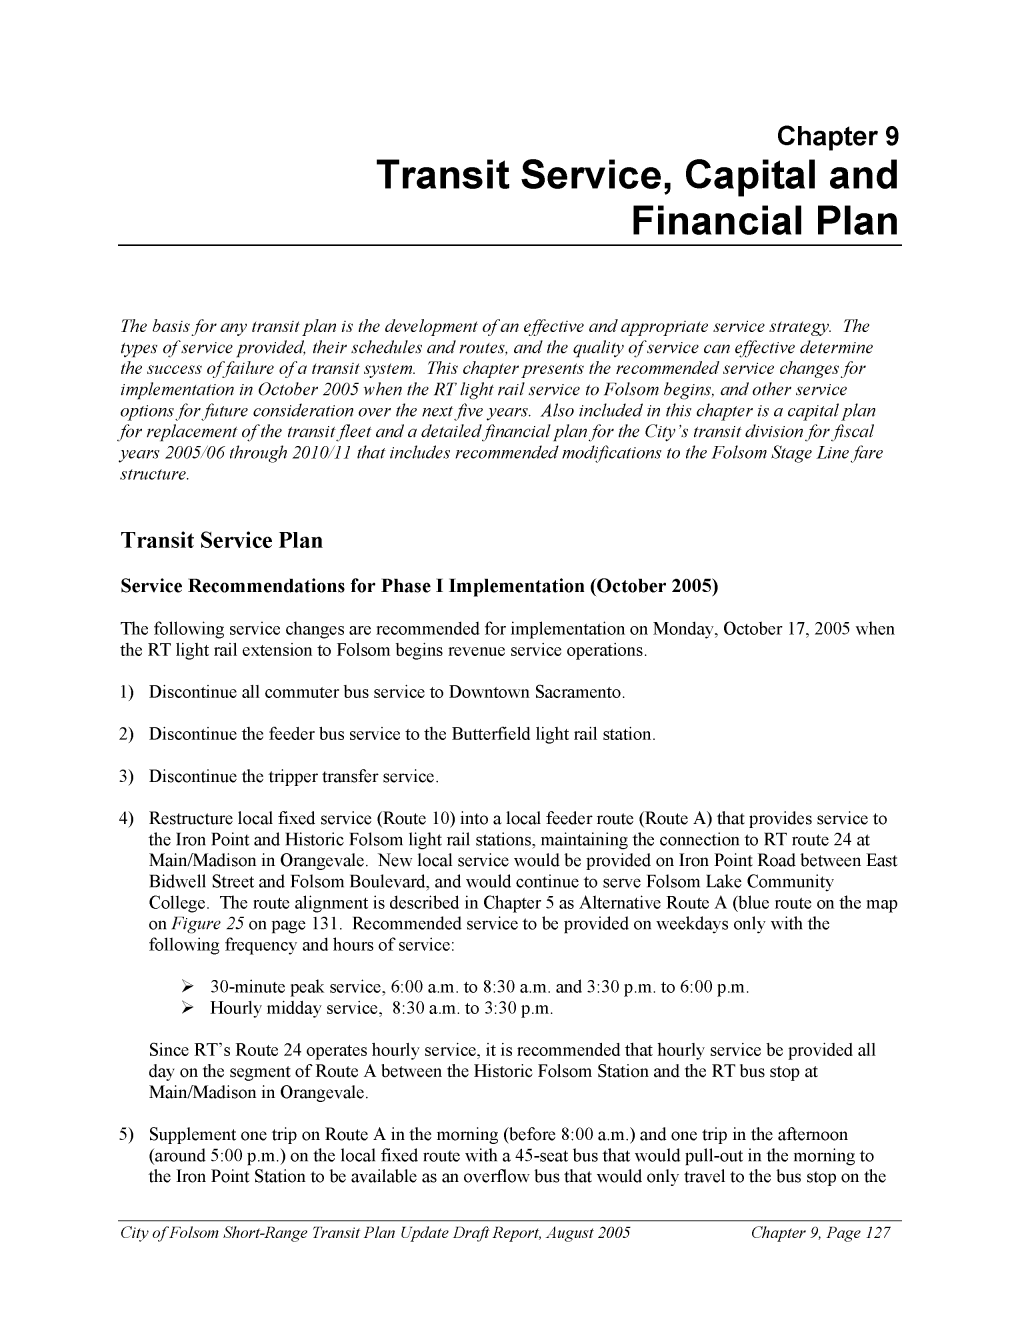 Transit Service, Capital and Financial Plan